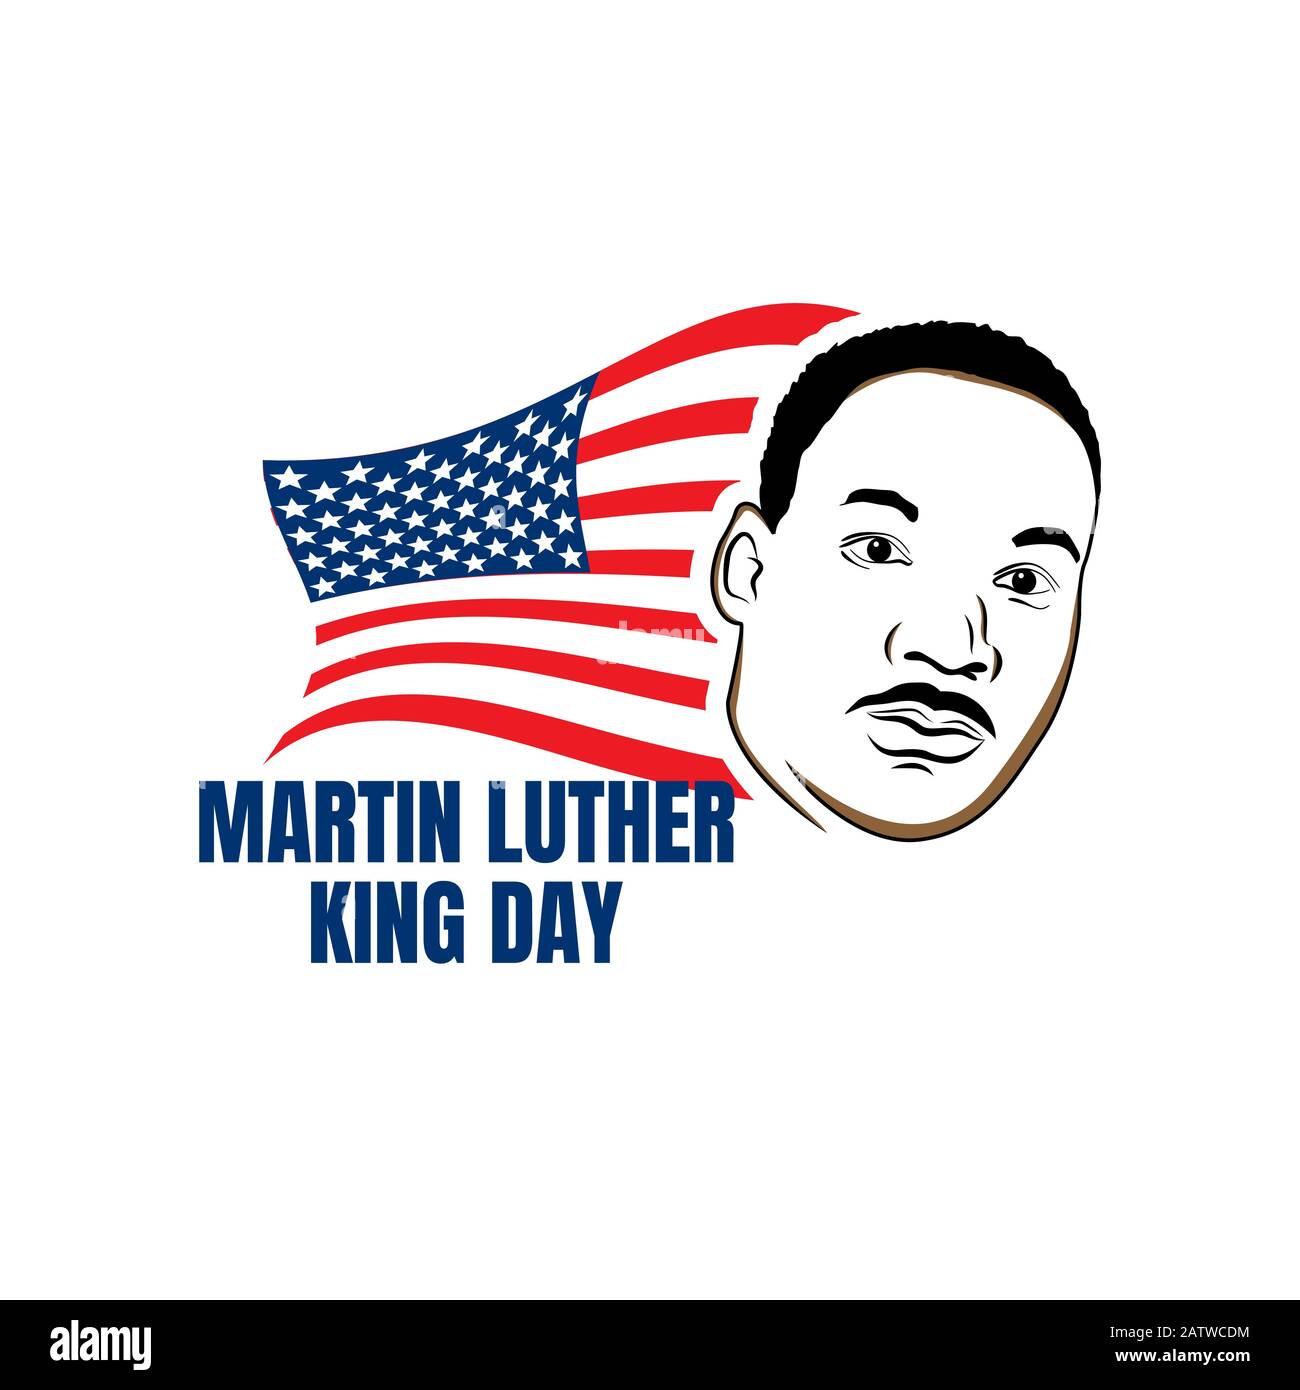 Martin luther king jr day With face American flag. MLK Banner of memorial day. Editable Vector illustration. eps 10 Stock Vector